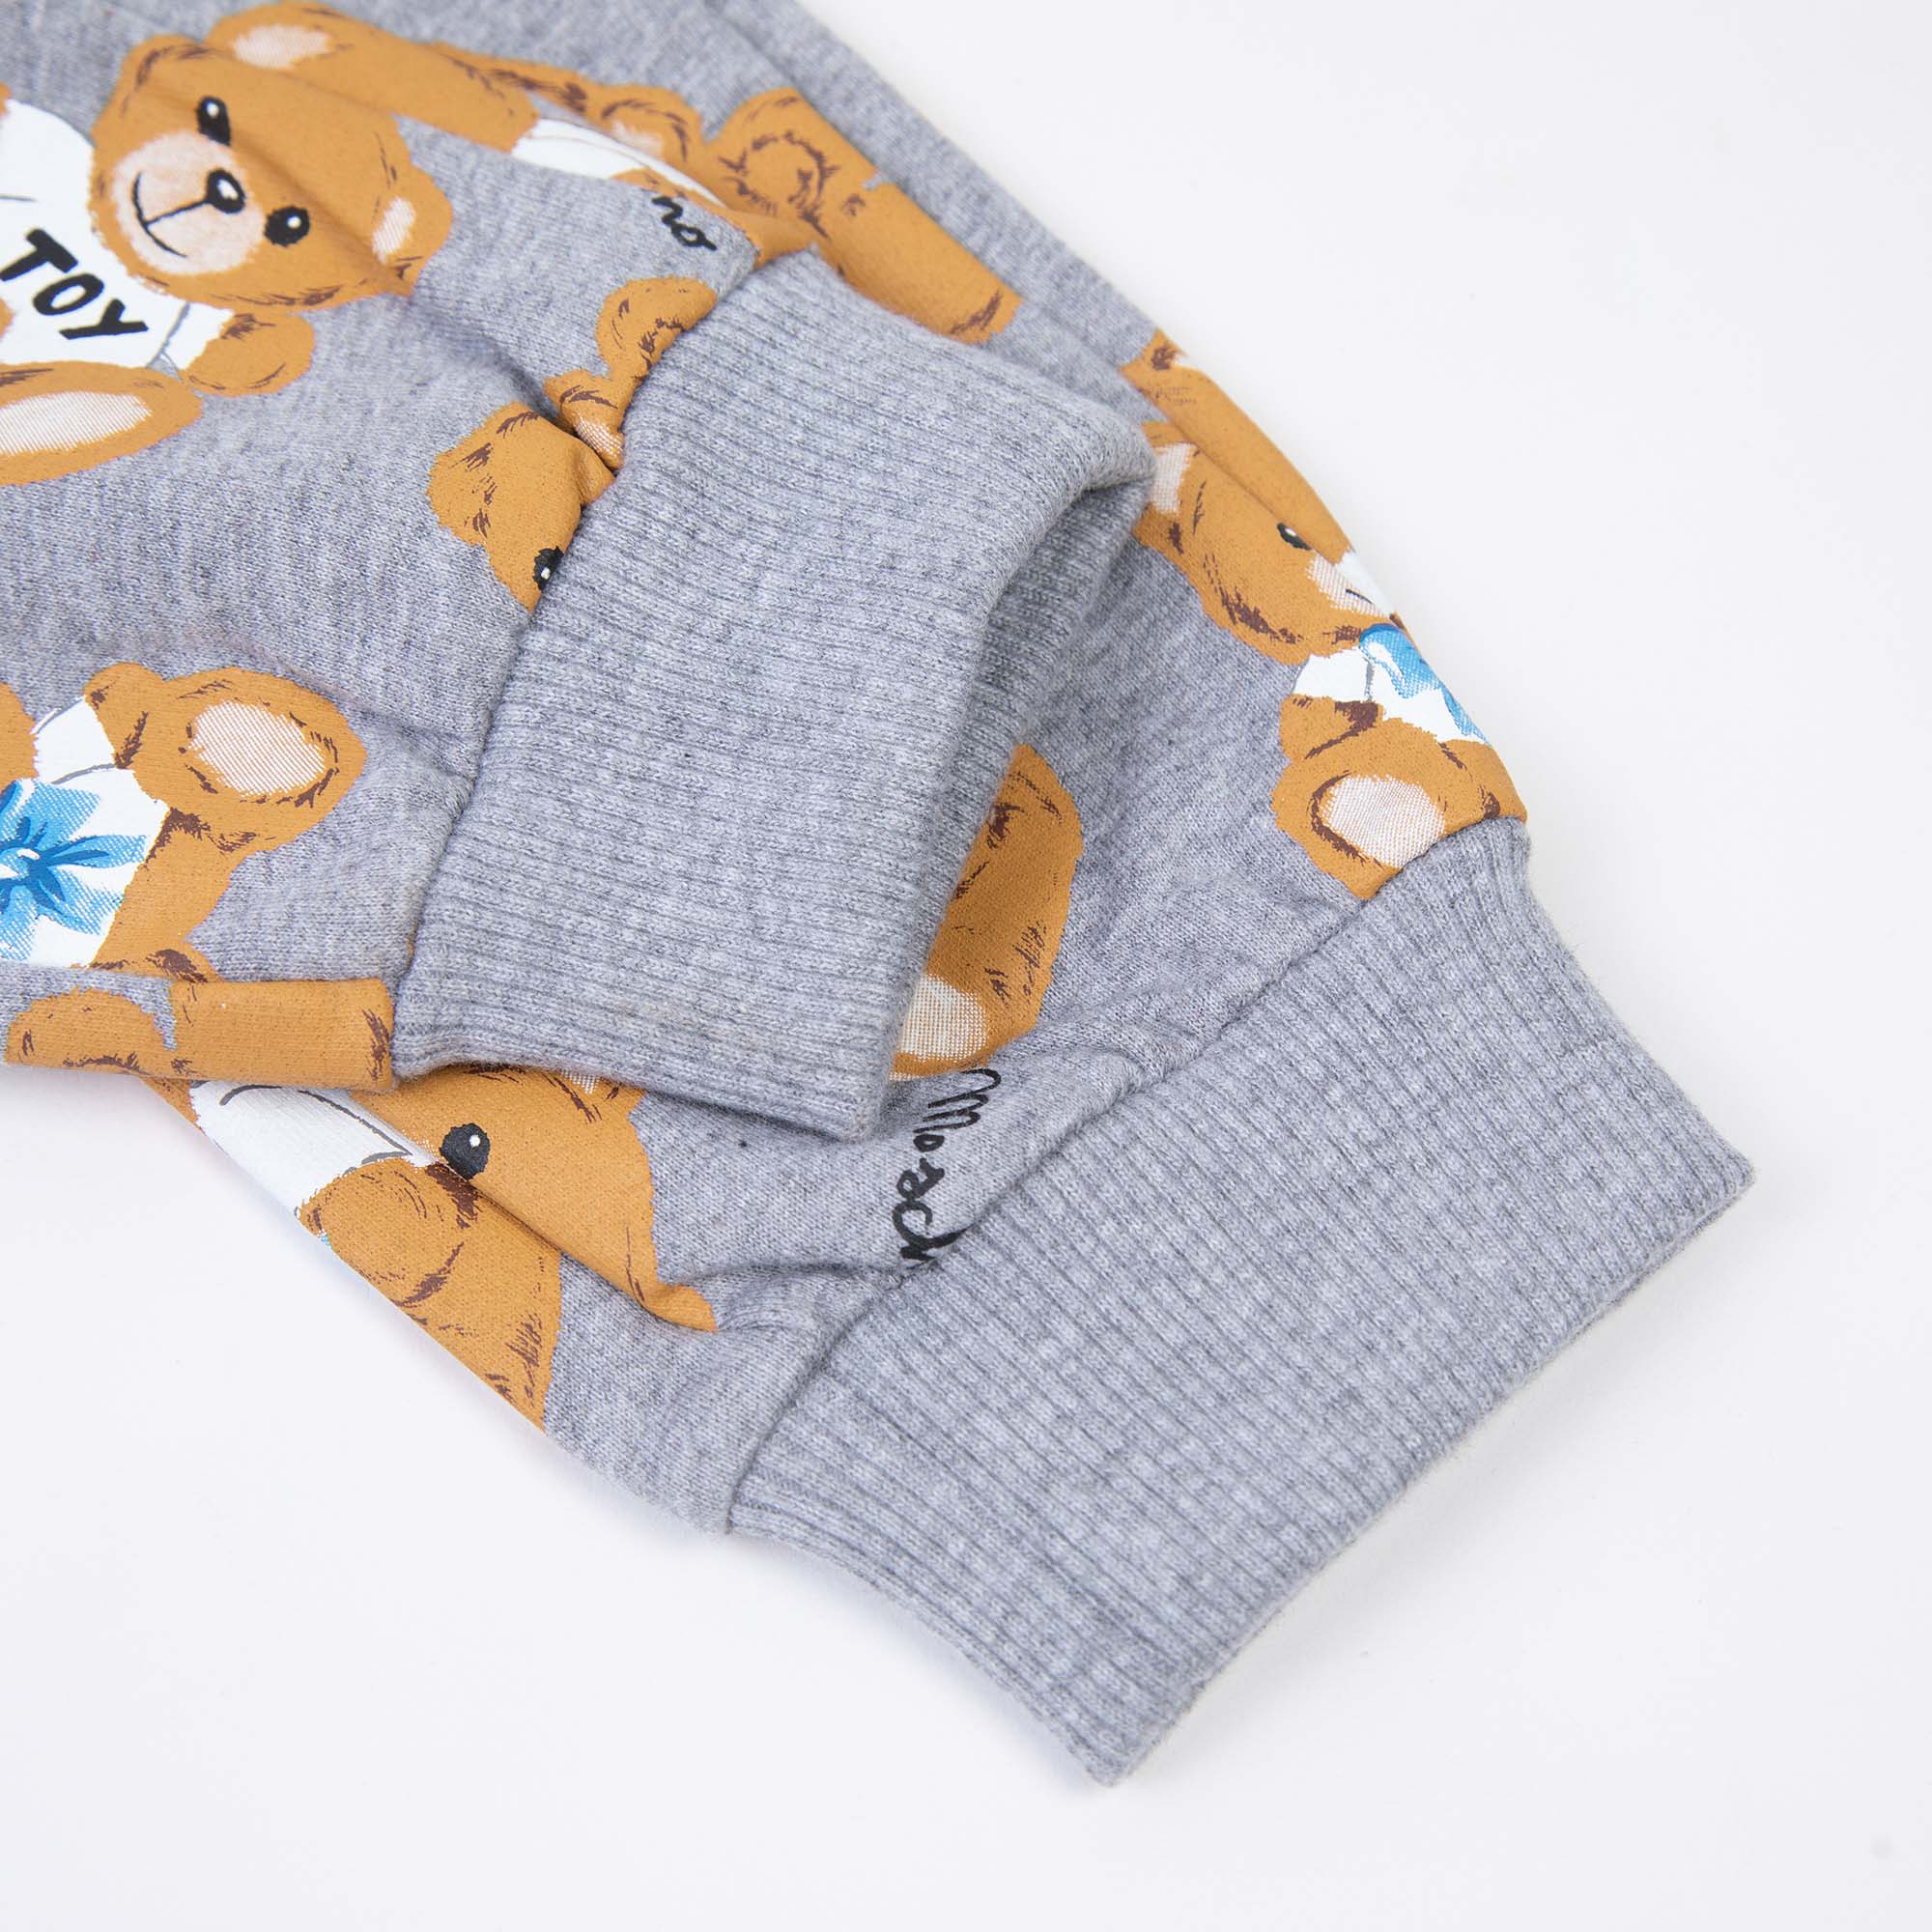 Baby Boys & Girls Grey Printed Cotton Trousers